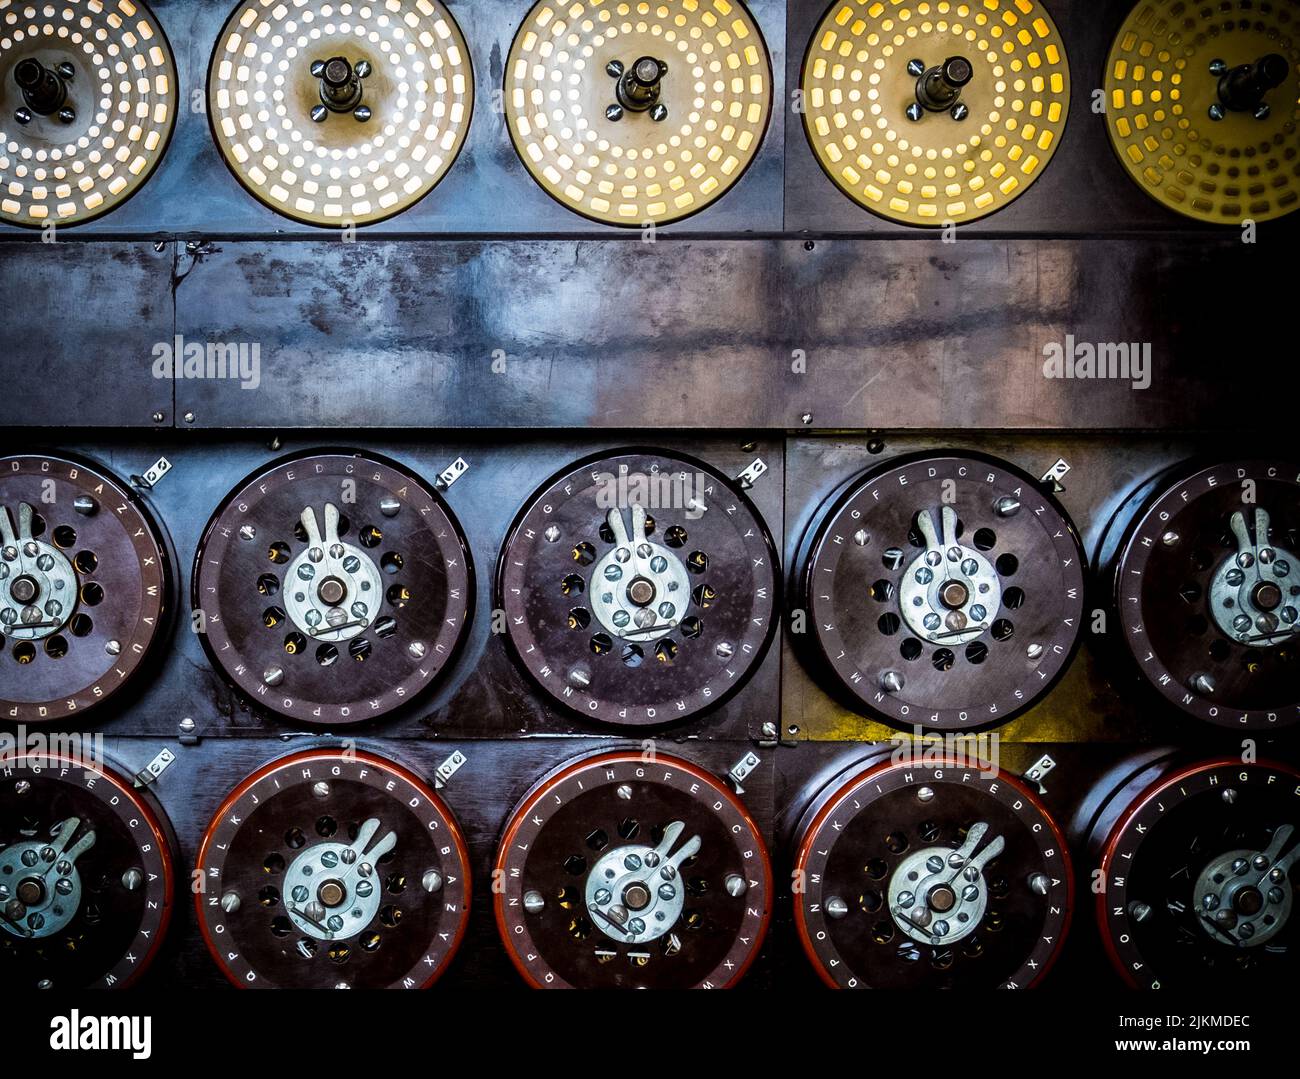 Indicator dials from the famous 'Bombe' machine at Bletchley Park used for deciphering German encrypted 'Enigma' messages.  January 2017 Stock Photo